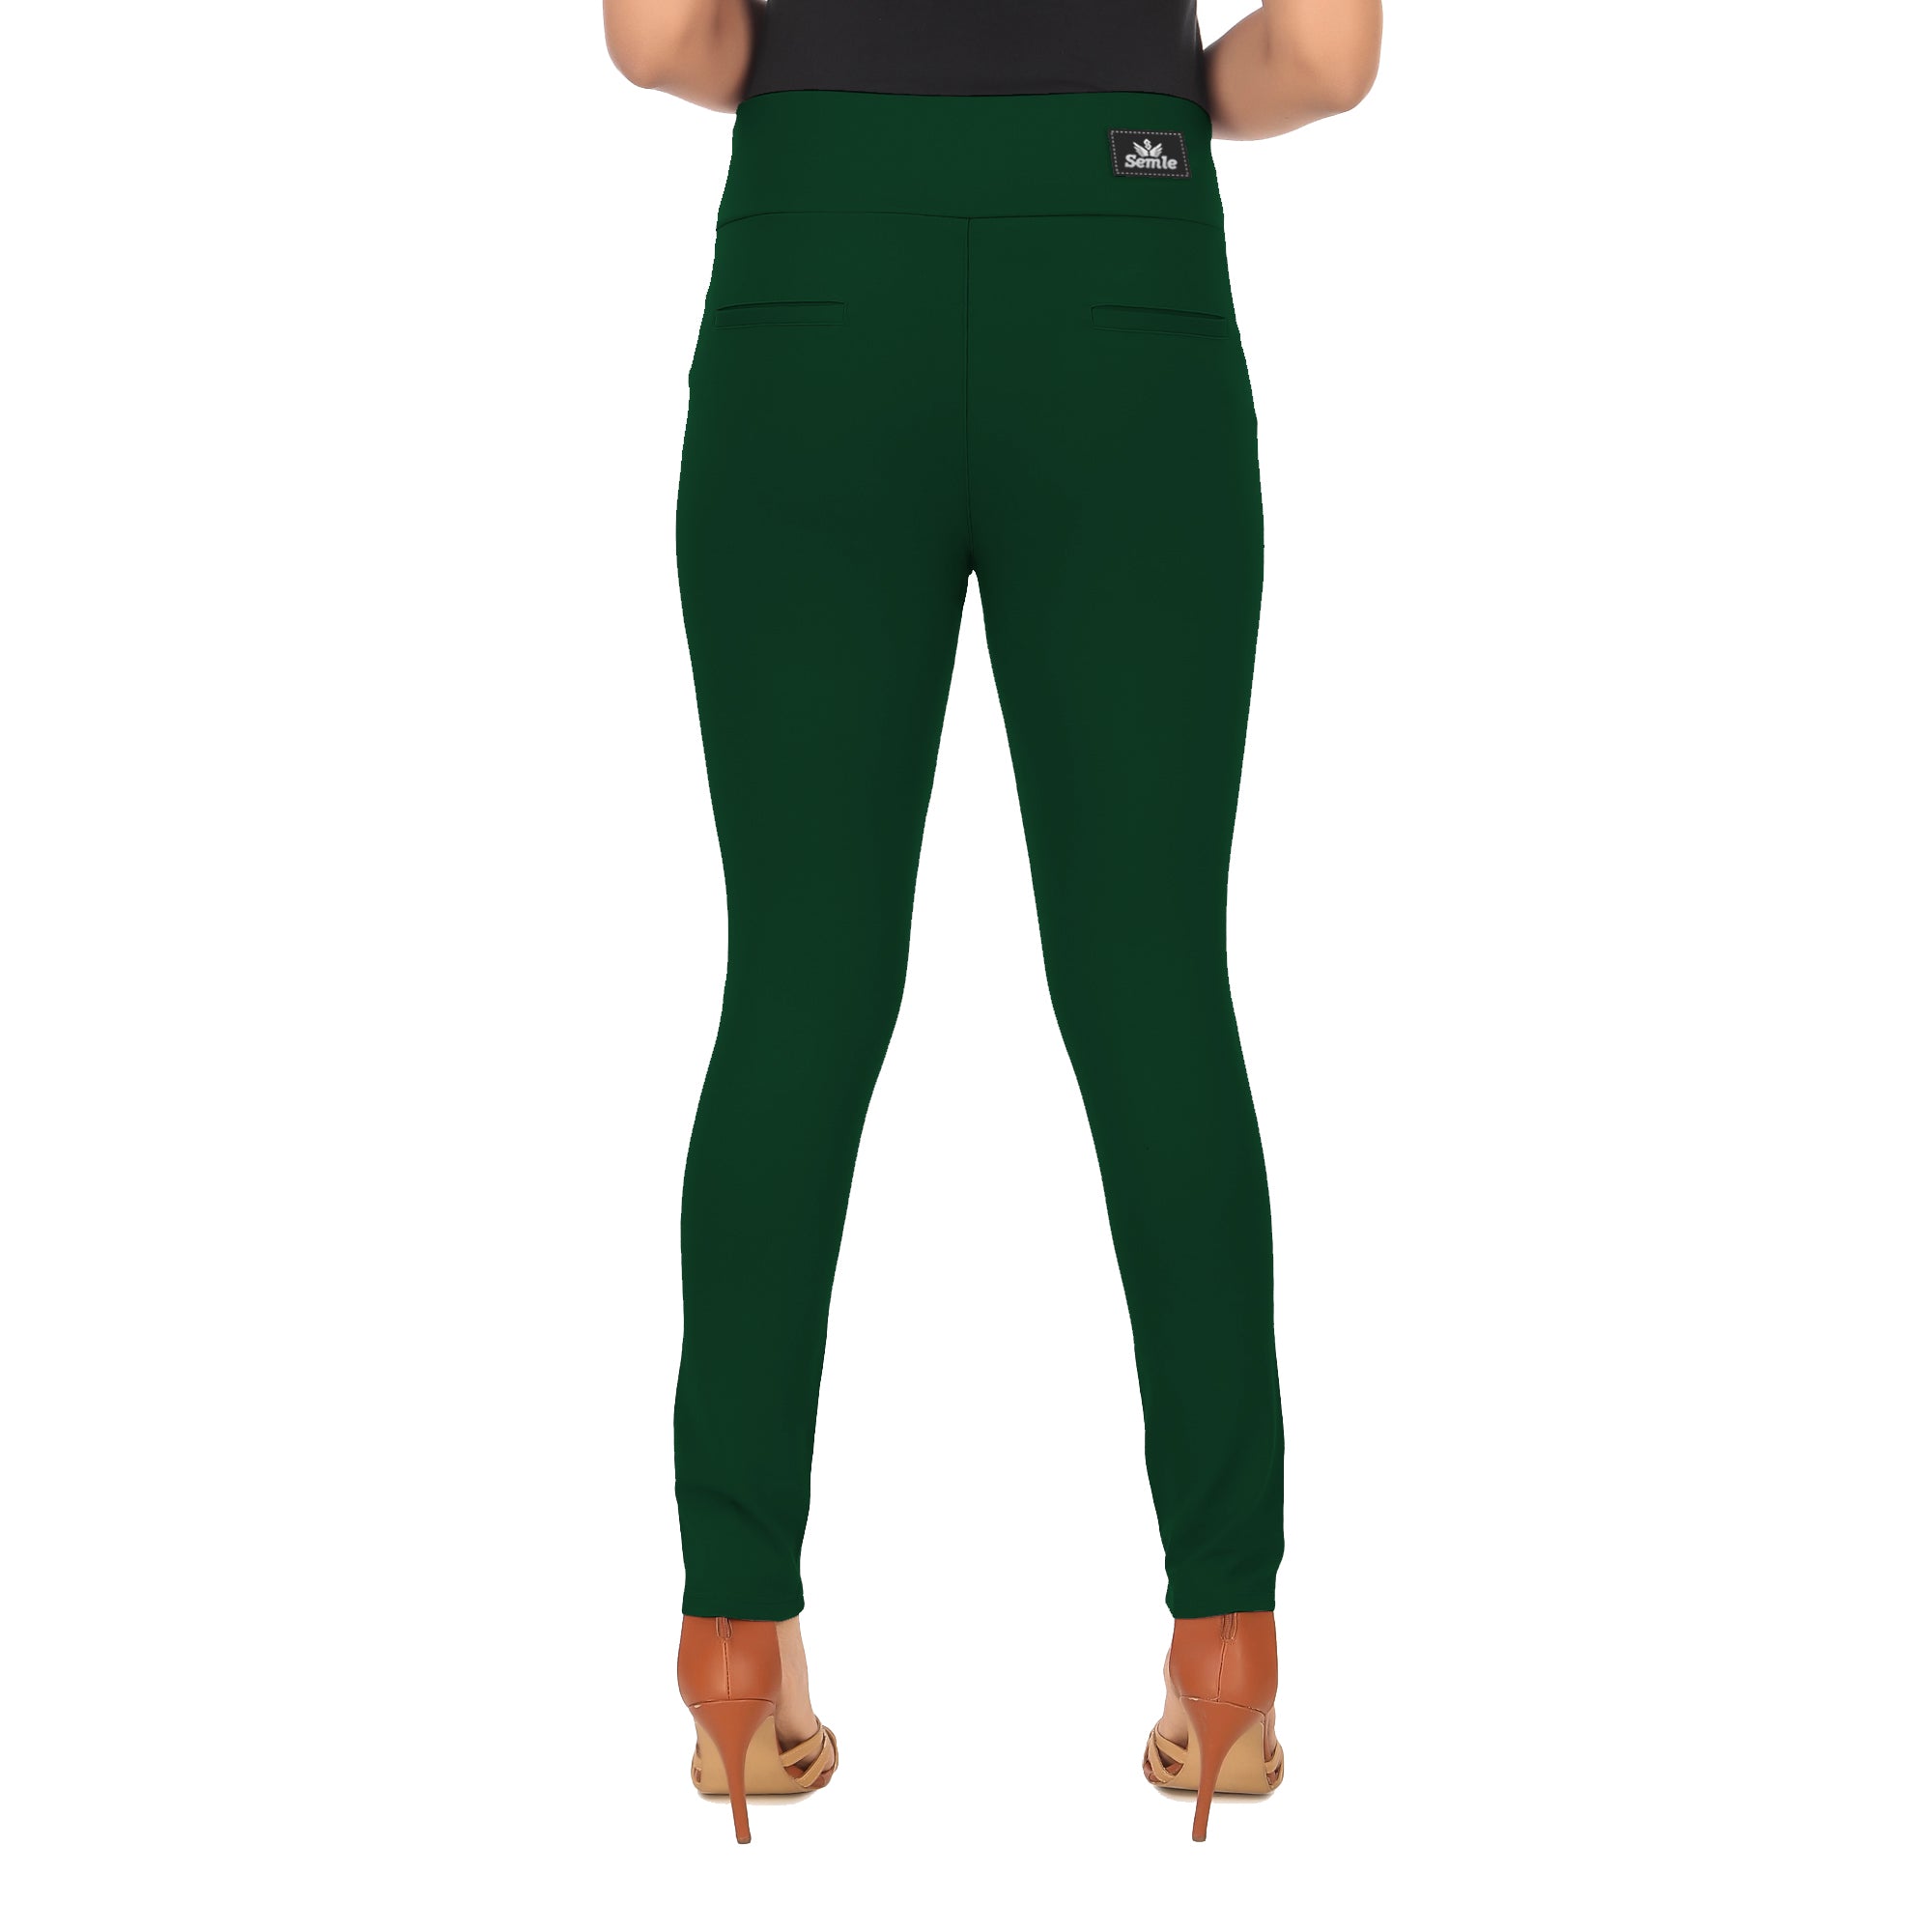 ComfortFit Women's Mid-Waist Jeggings with 2 Front Pockets - Dark Green 